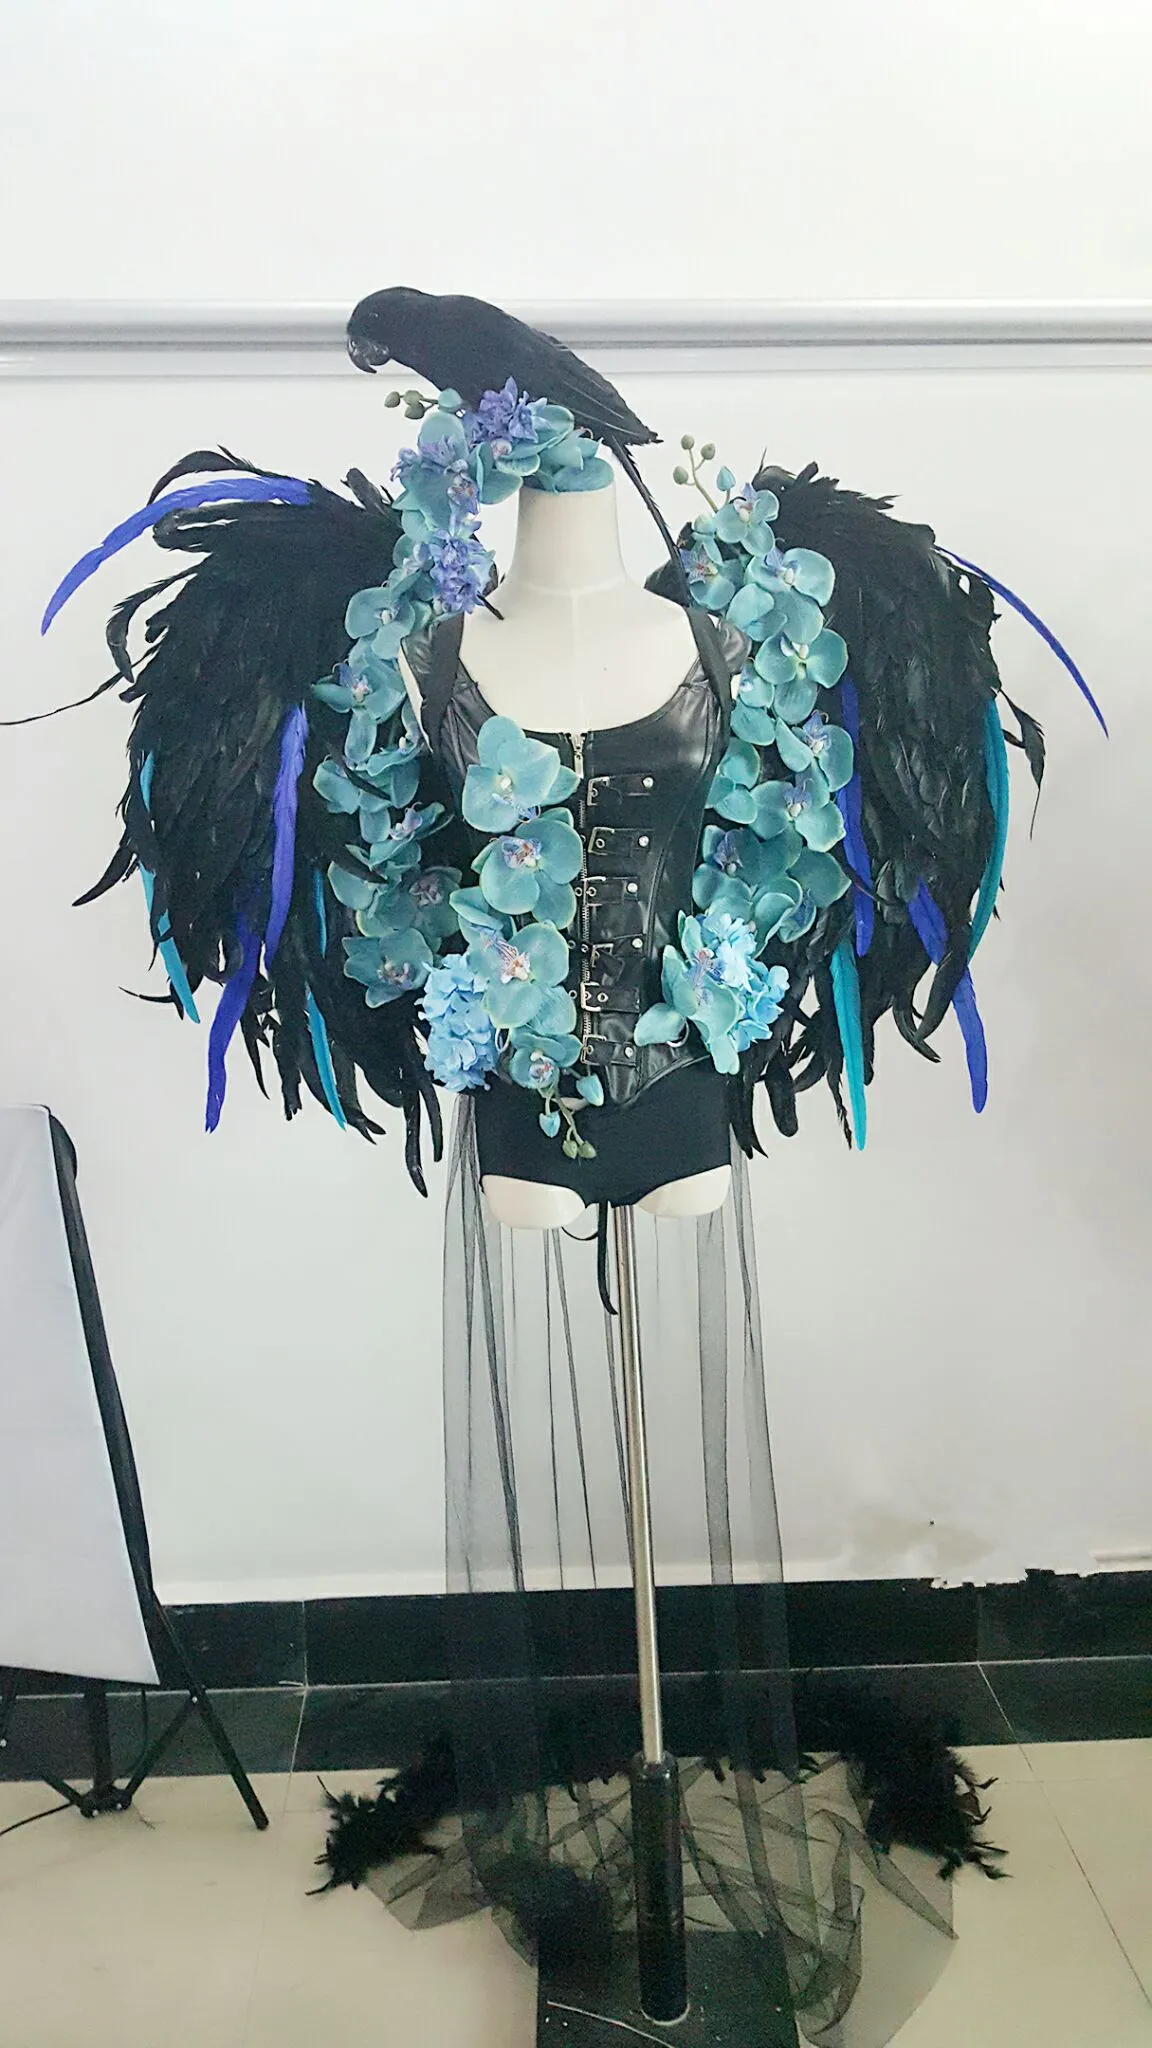 Black angel feather wings Magazine shooting Display Party wedding decoration supplies model show props EMS Free shipping